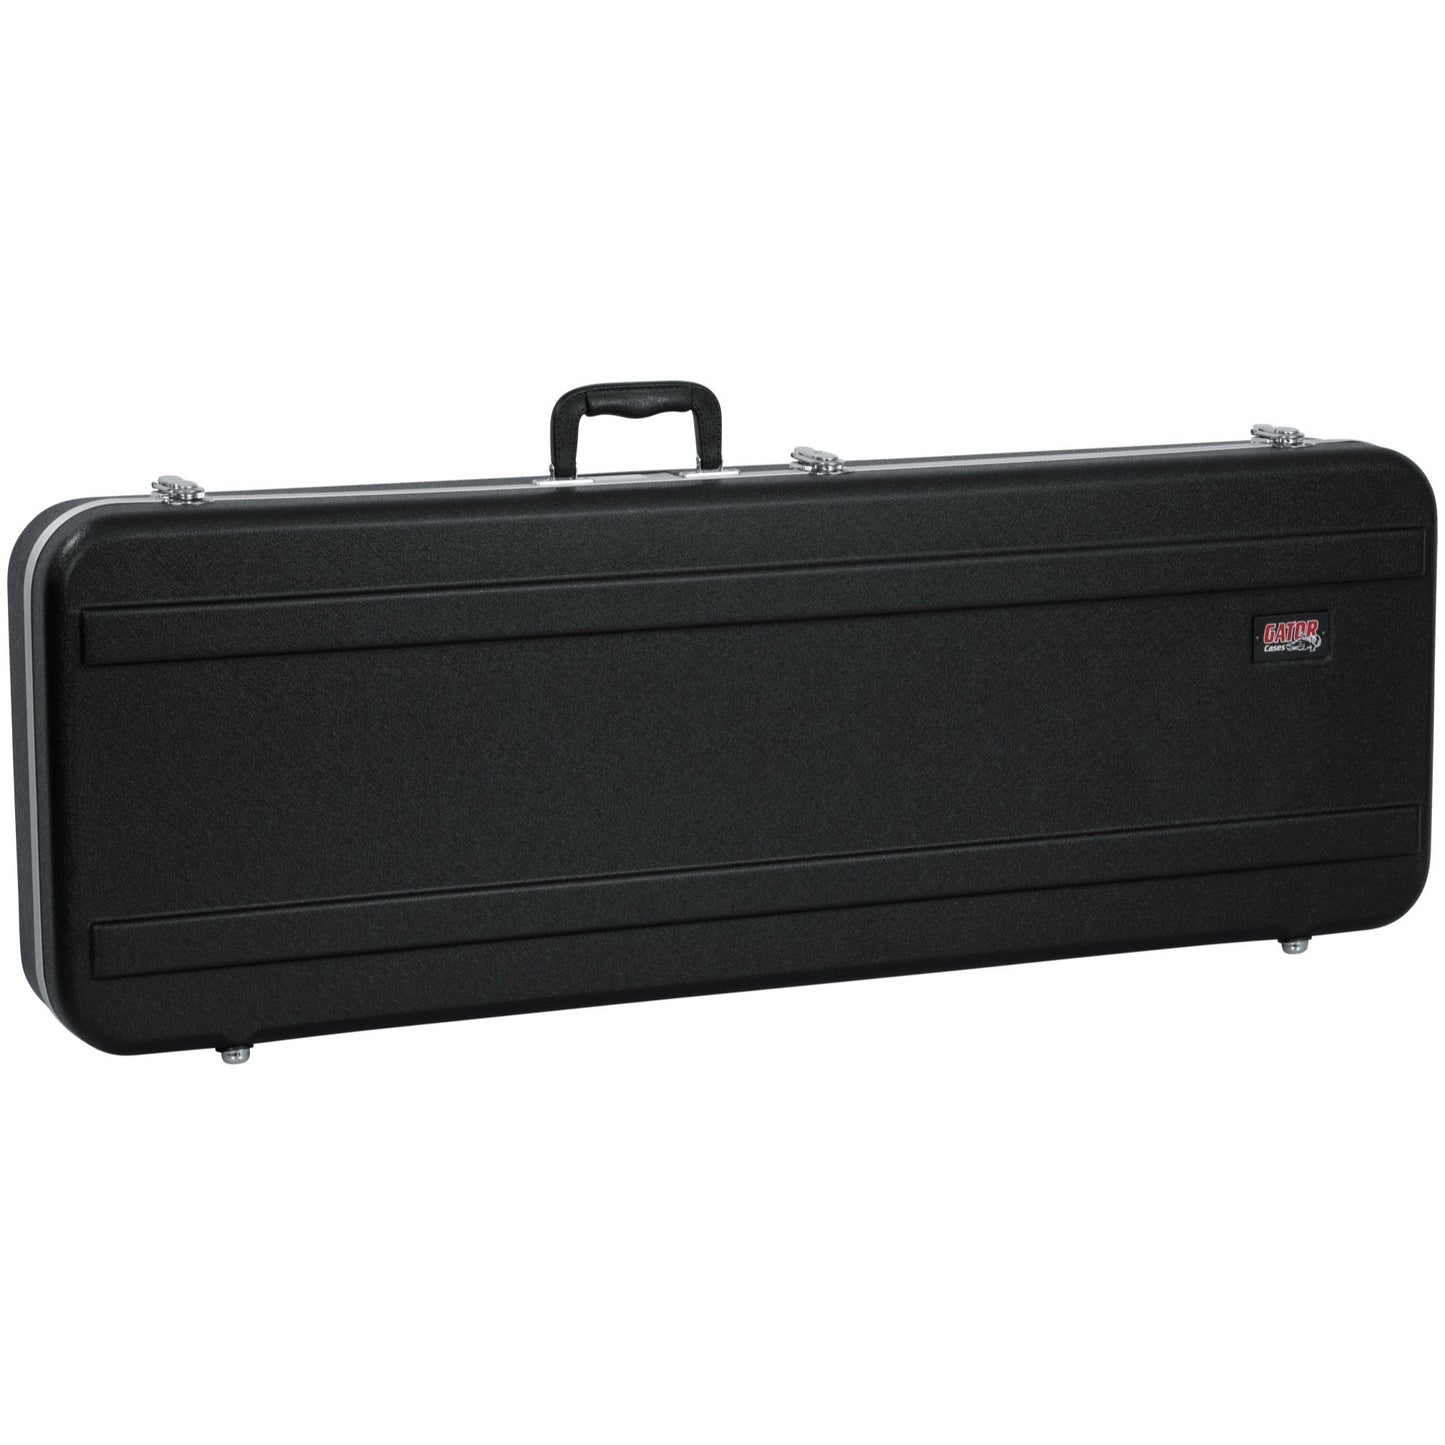 Gator GC-ELEC-XL Deluxe ABS Extra Long Fit-All Electric Guitar Case